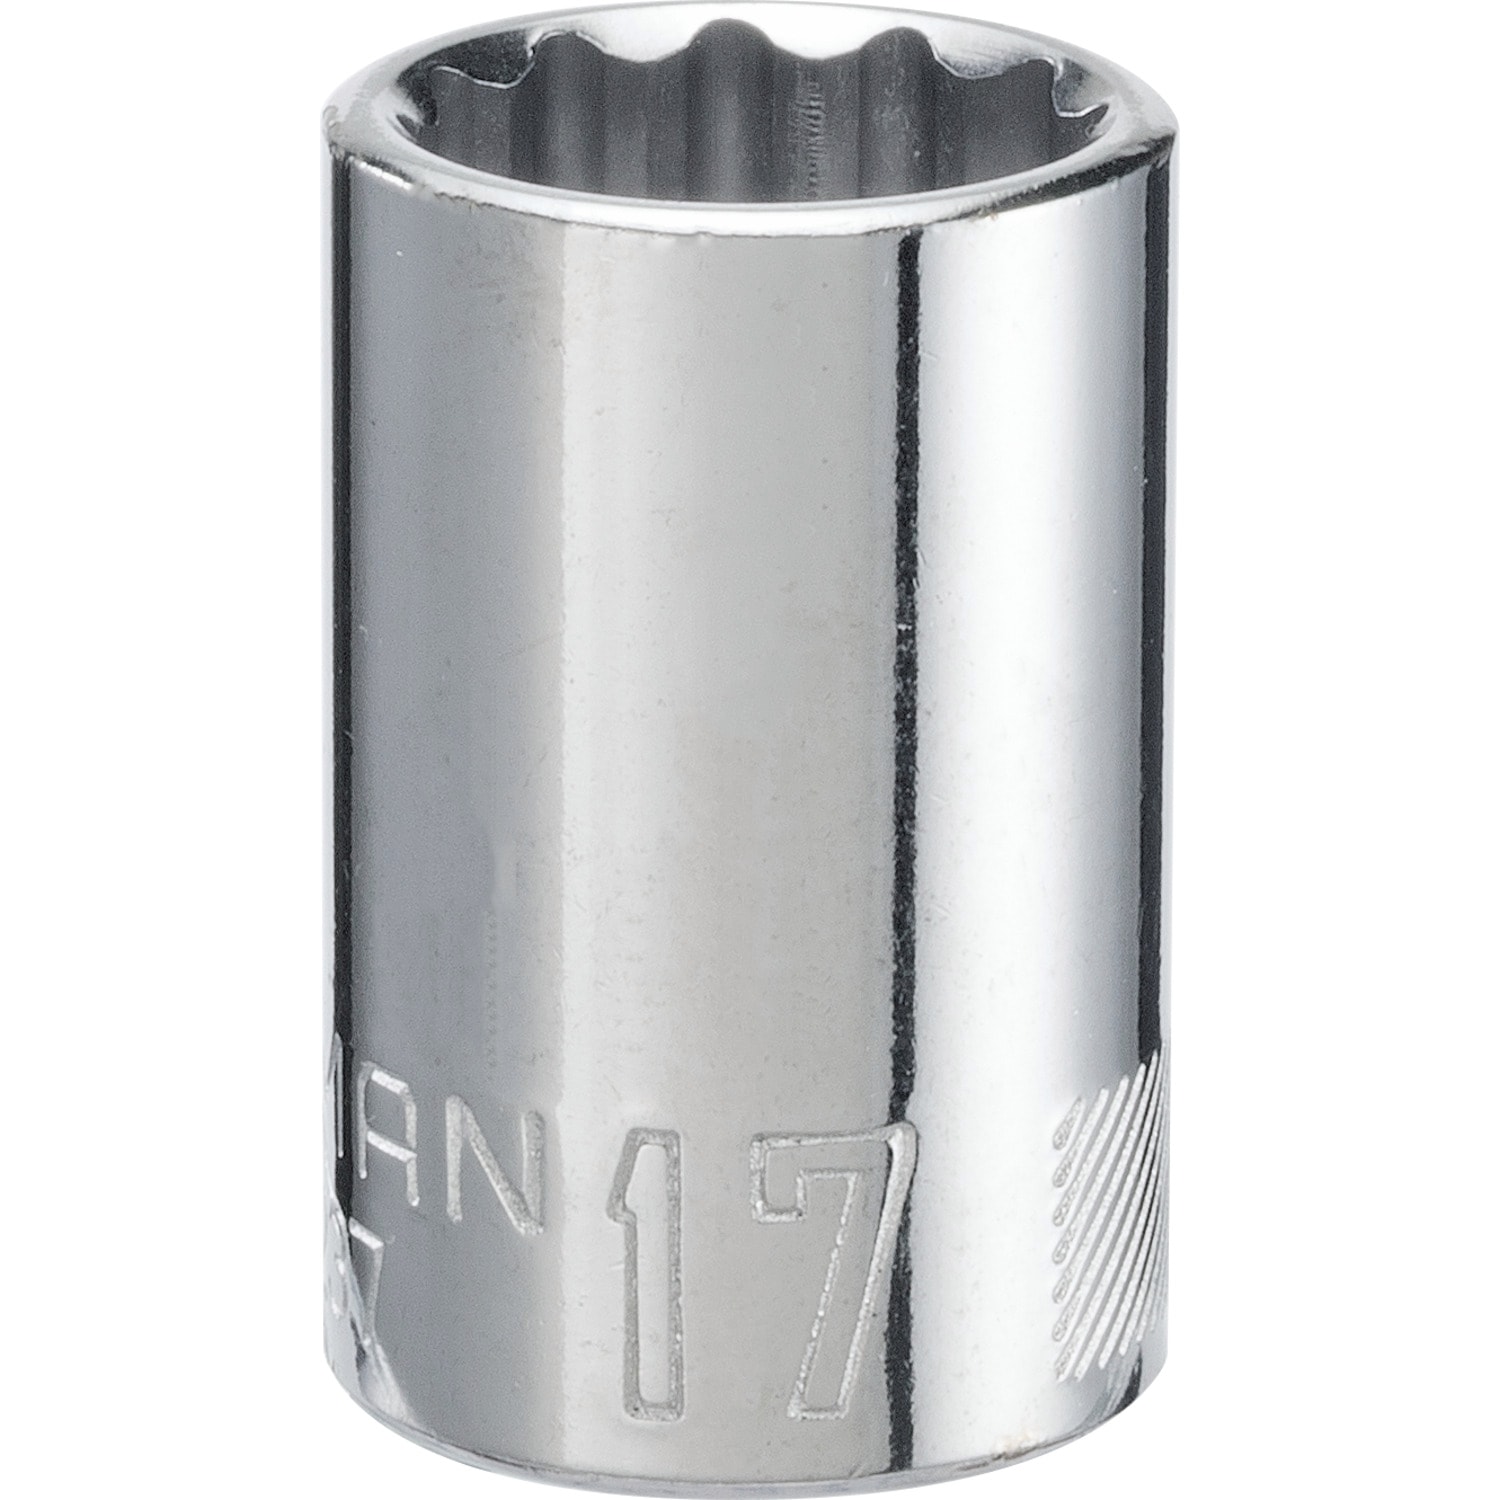 17mm CRAFTSMAN Shallow Socket Metric 12-Point 1/2-Inch Drive CMMT44237 